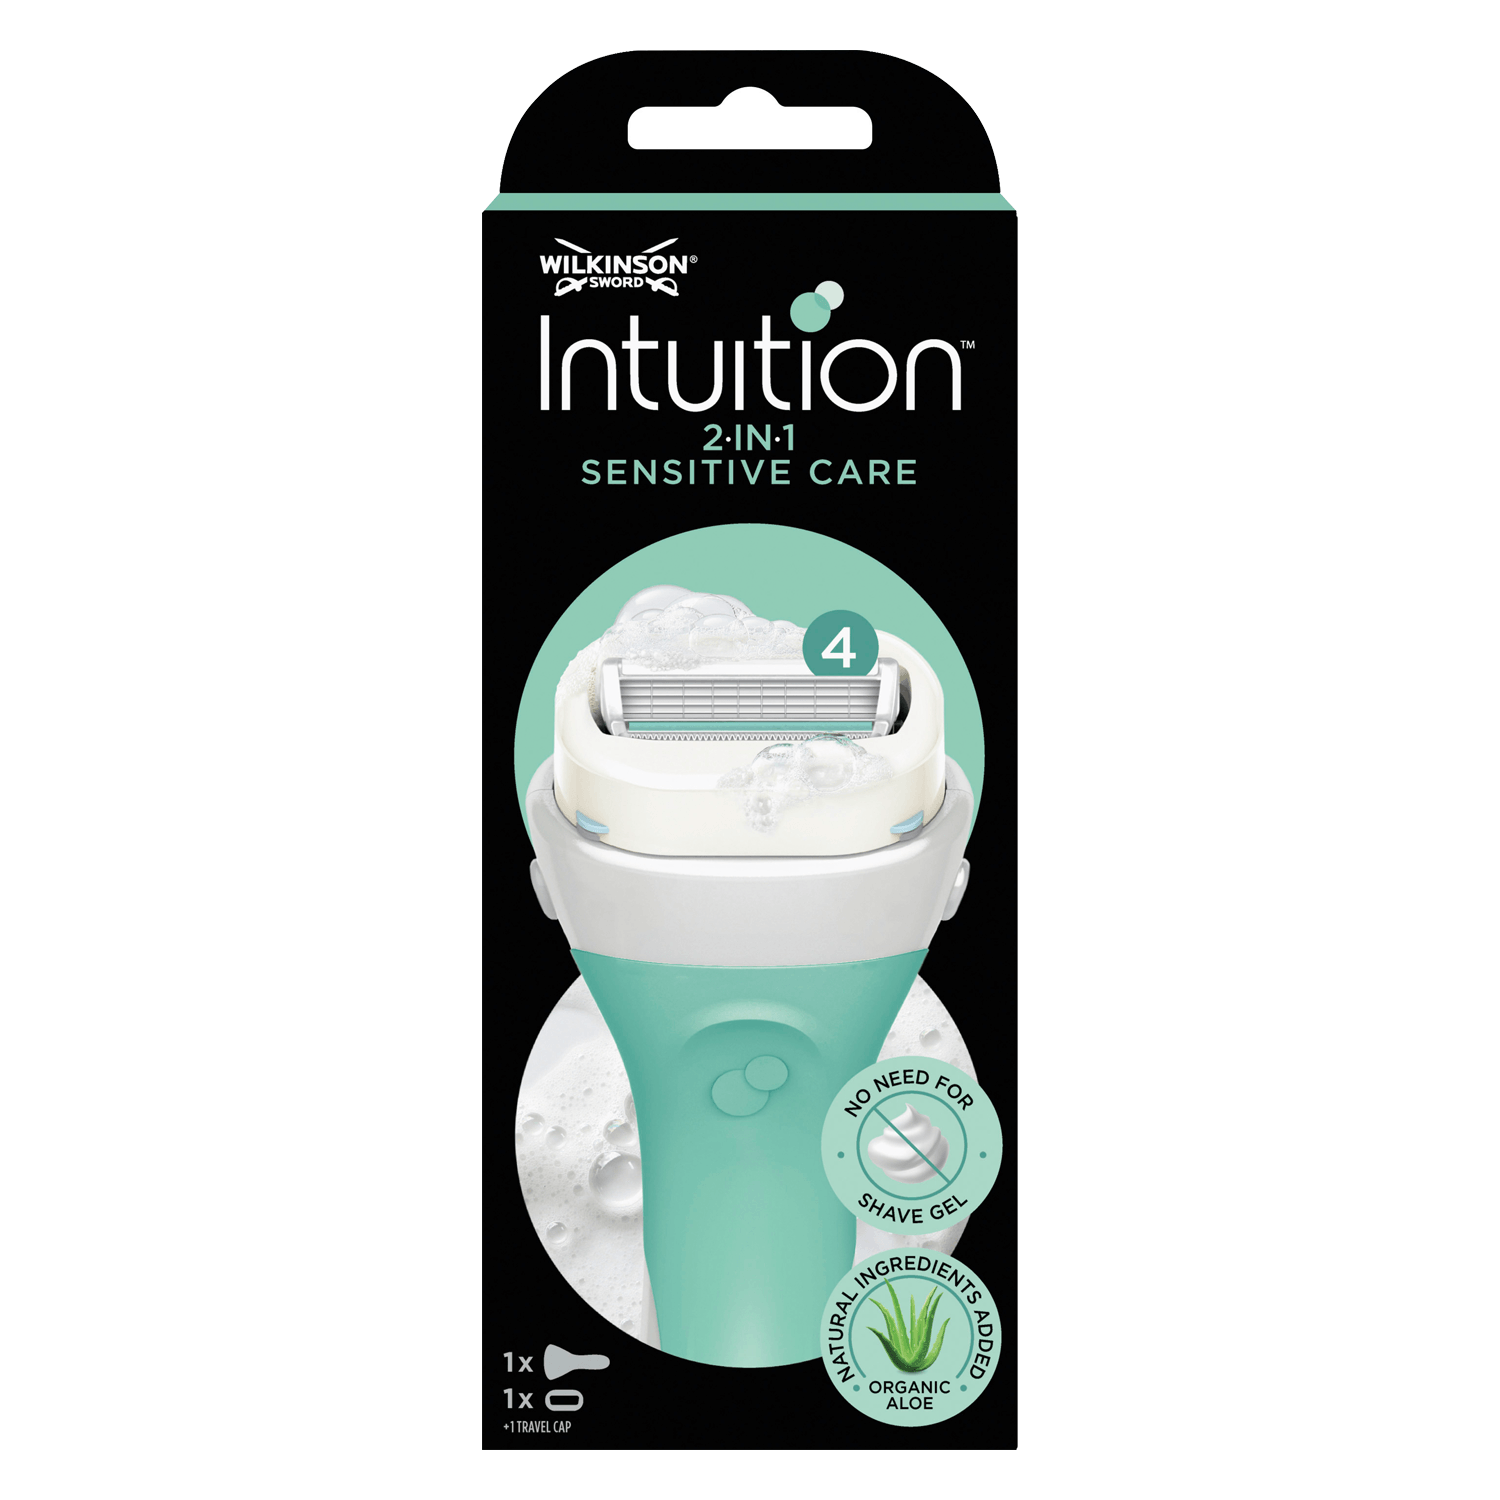 Product image from Intuition - Sensitive Care Rasierer